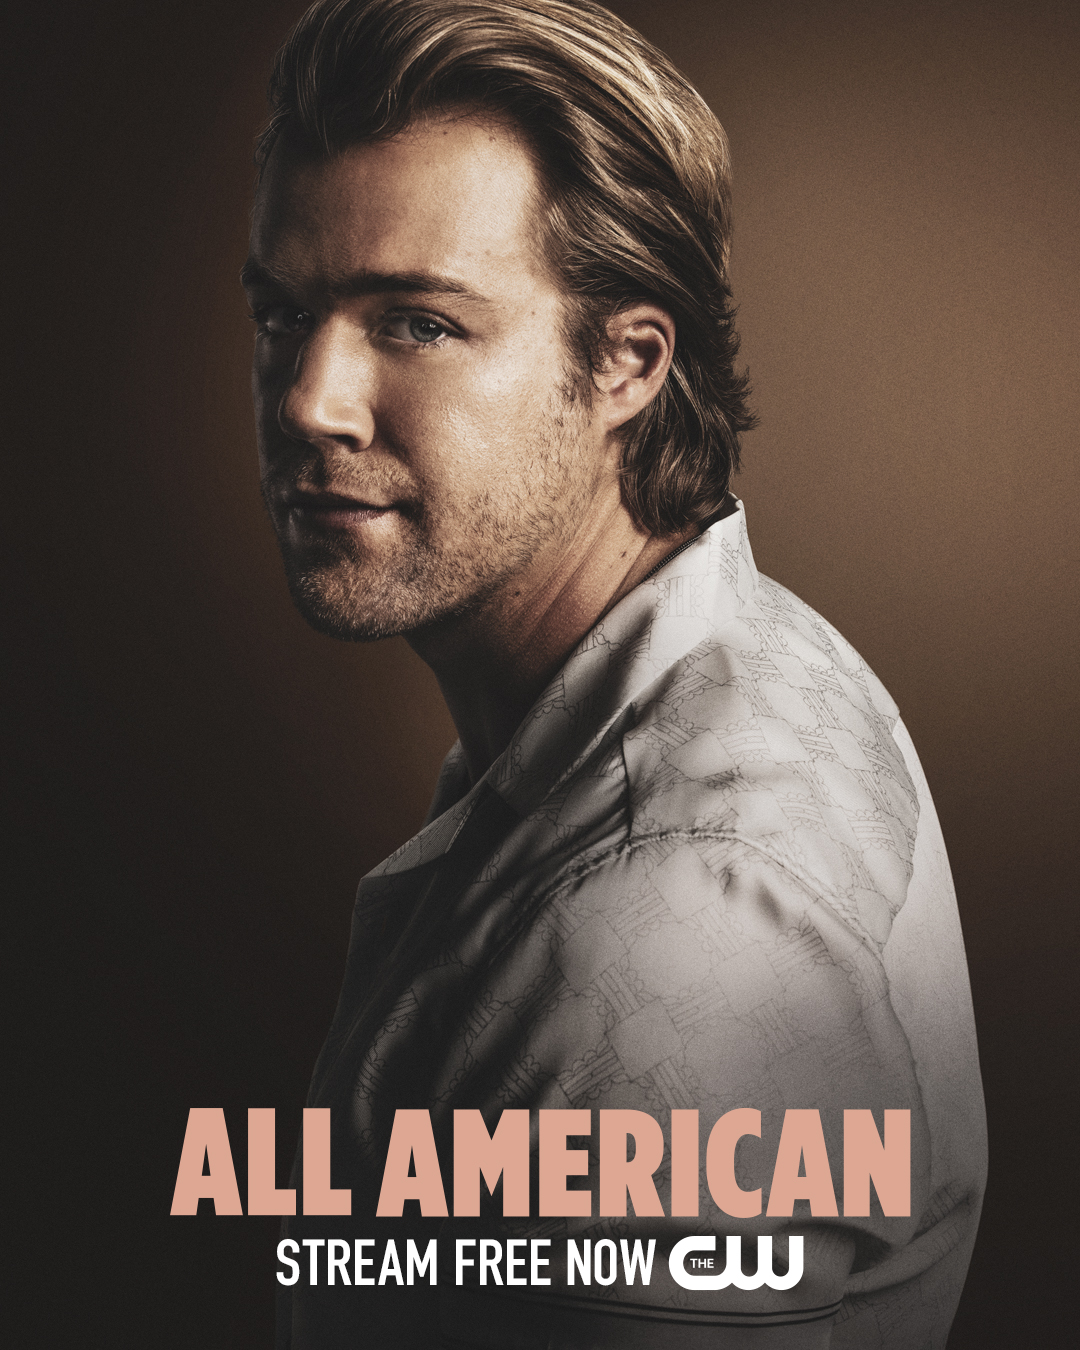 All American Season 5 - watch full episodes streaming online